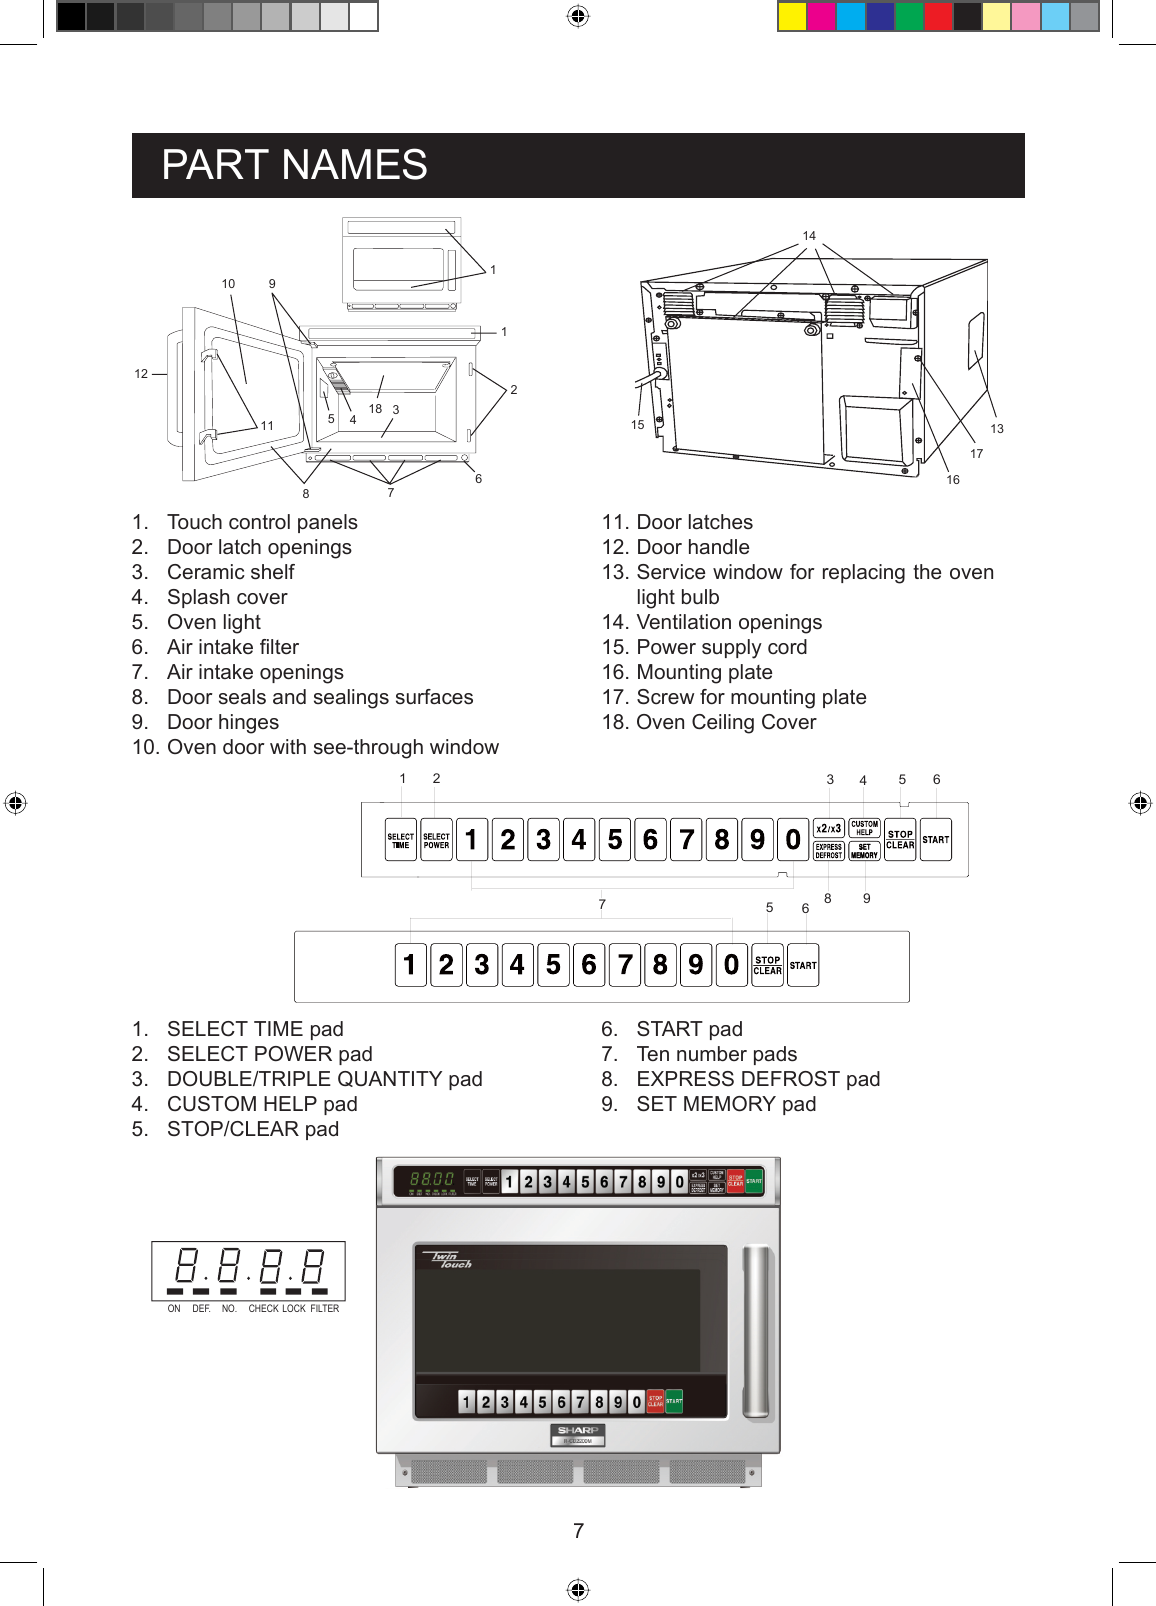 7PART NAMES1.  Touch control panels2.  Door latch openings3.  Ceramic shelf4.  Splash cover5.  Oven light6.  Air intake ﬁlter7.  Air intake openings8.  Door seals and sealings surfaces9.  Door hinges10. Oven door with see-through window11. Door latches12. Door handle13. Service window for replacing the oven light bulb14. Ventilation openings15. Power supply cord16. Mounting plate17. Screw for mounting plate18. Oven Ceiling Cover1.  SELECT TIME pad2.  SELECT POWER pad 3.  DOUBLE/TRIPLE QUANTITY pad4.  CUSTOM HELP pad5.  STOP/CLEAR pad6.  START pad7.  Ten number pads8.  EXPRESS DEFROST pad9.  SET MEMORY pad1 2 345 678 9561210 91127811 5418 3614171613ON DEF. NO. CHECK LOCK FILTER15